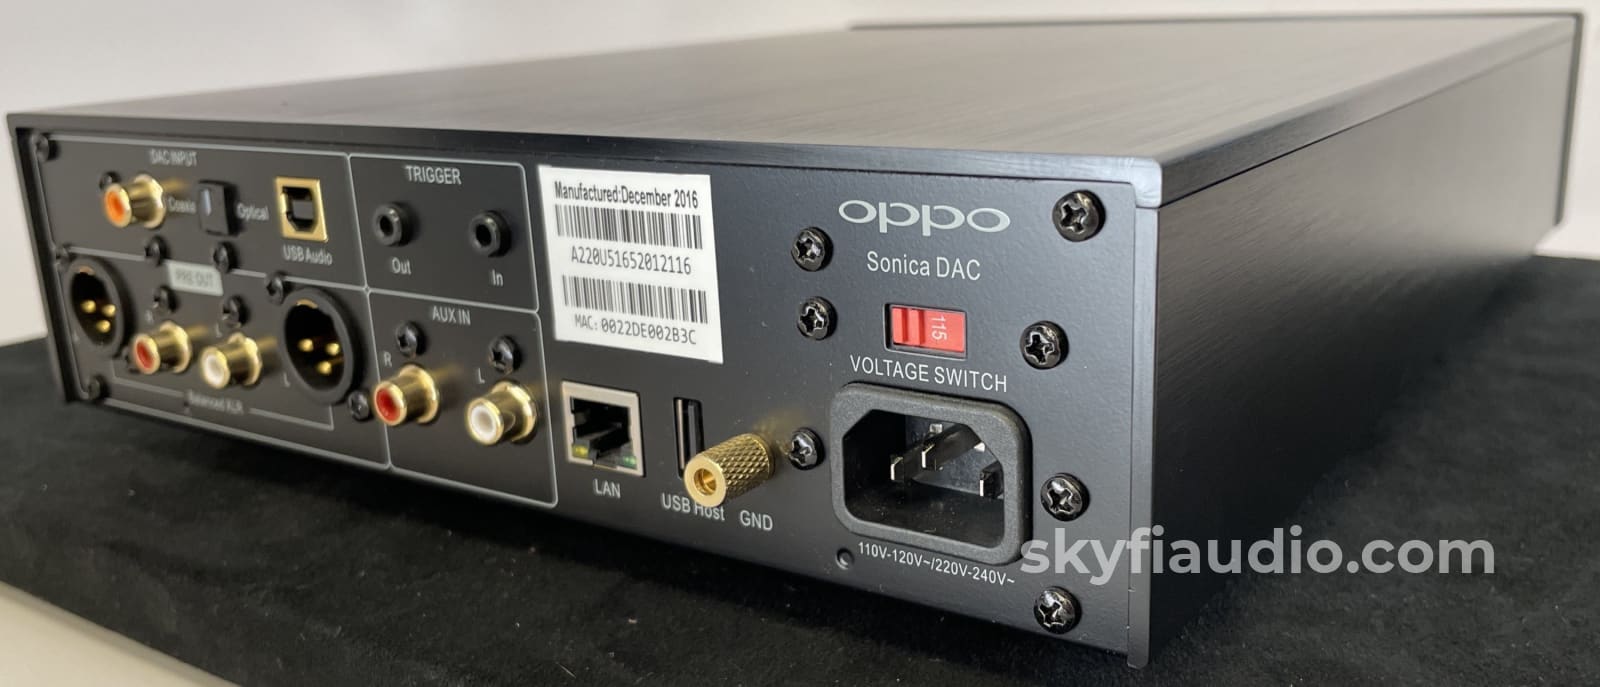 Oppo Sonica Audiophile Dac And Network Streamer - Ess Es9038Pro Sabre Pro Cd + Digital